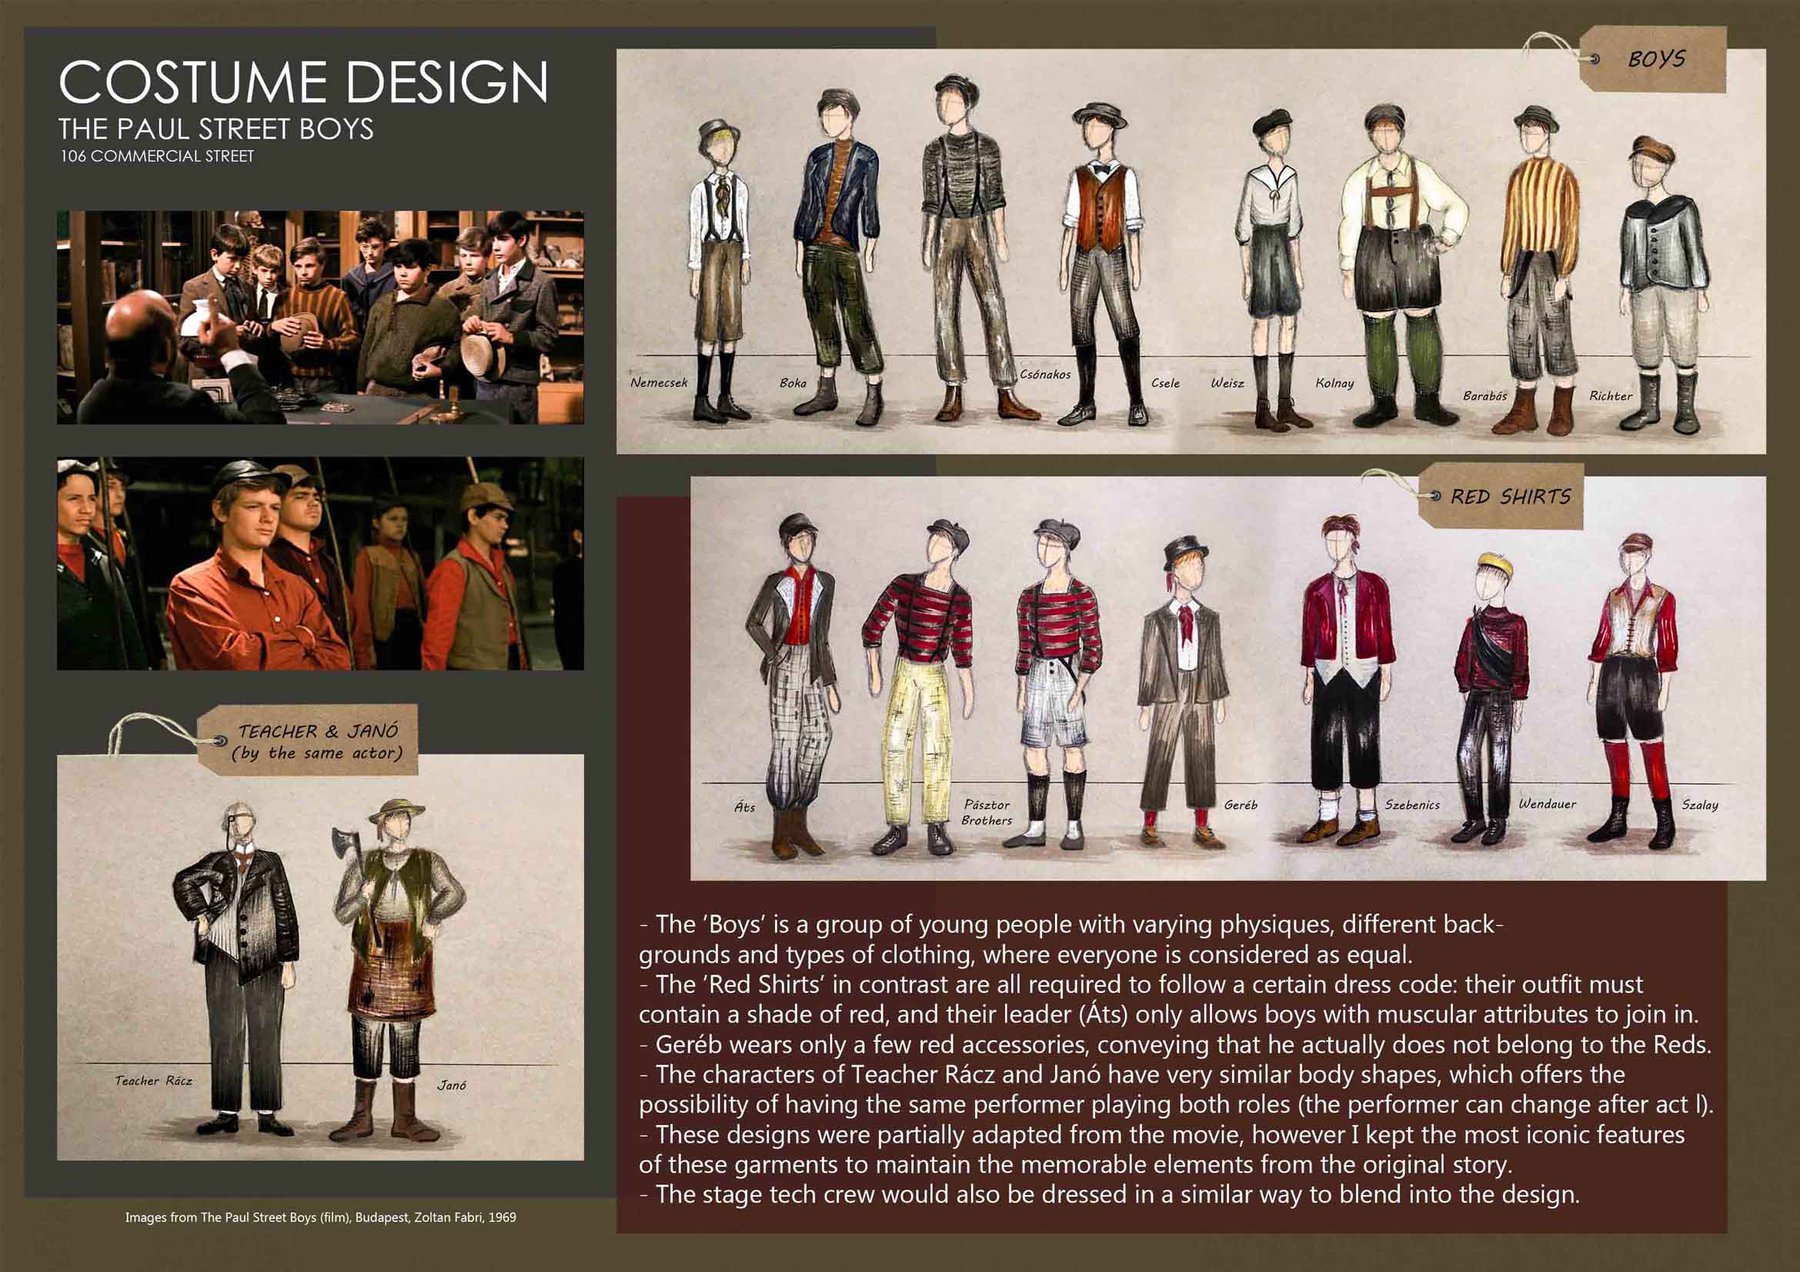 Illustrations of costume designs for the cast of The Paul Street Boys